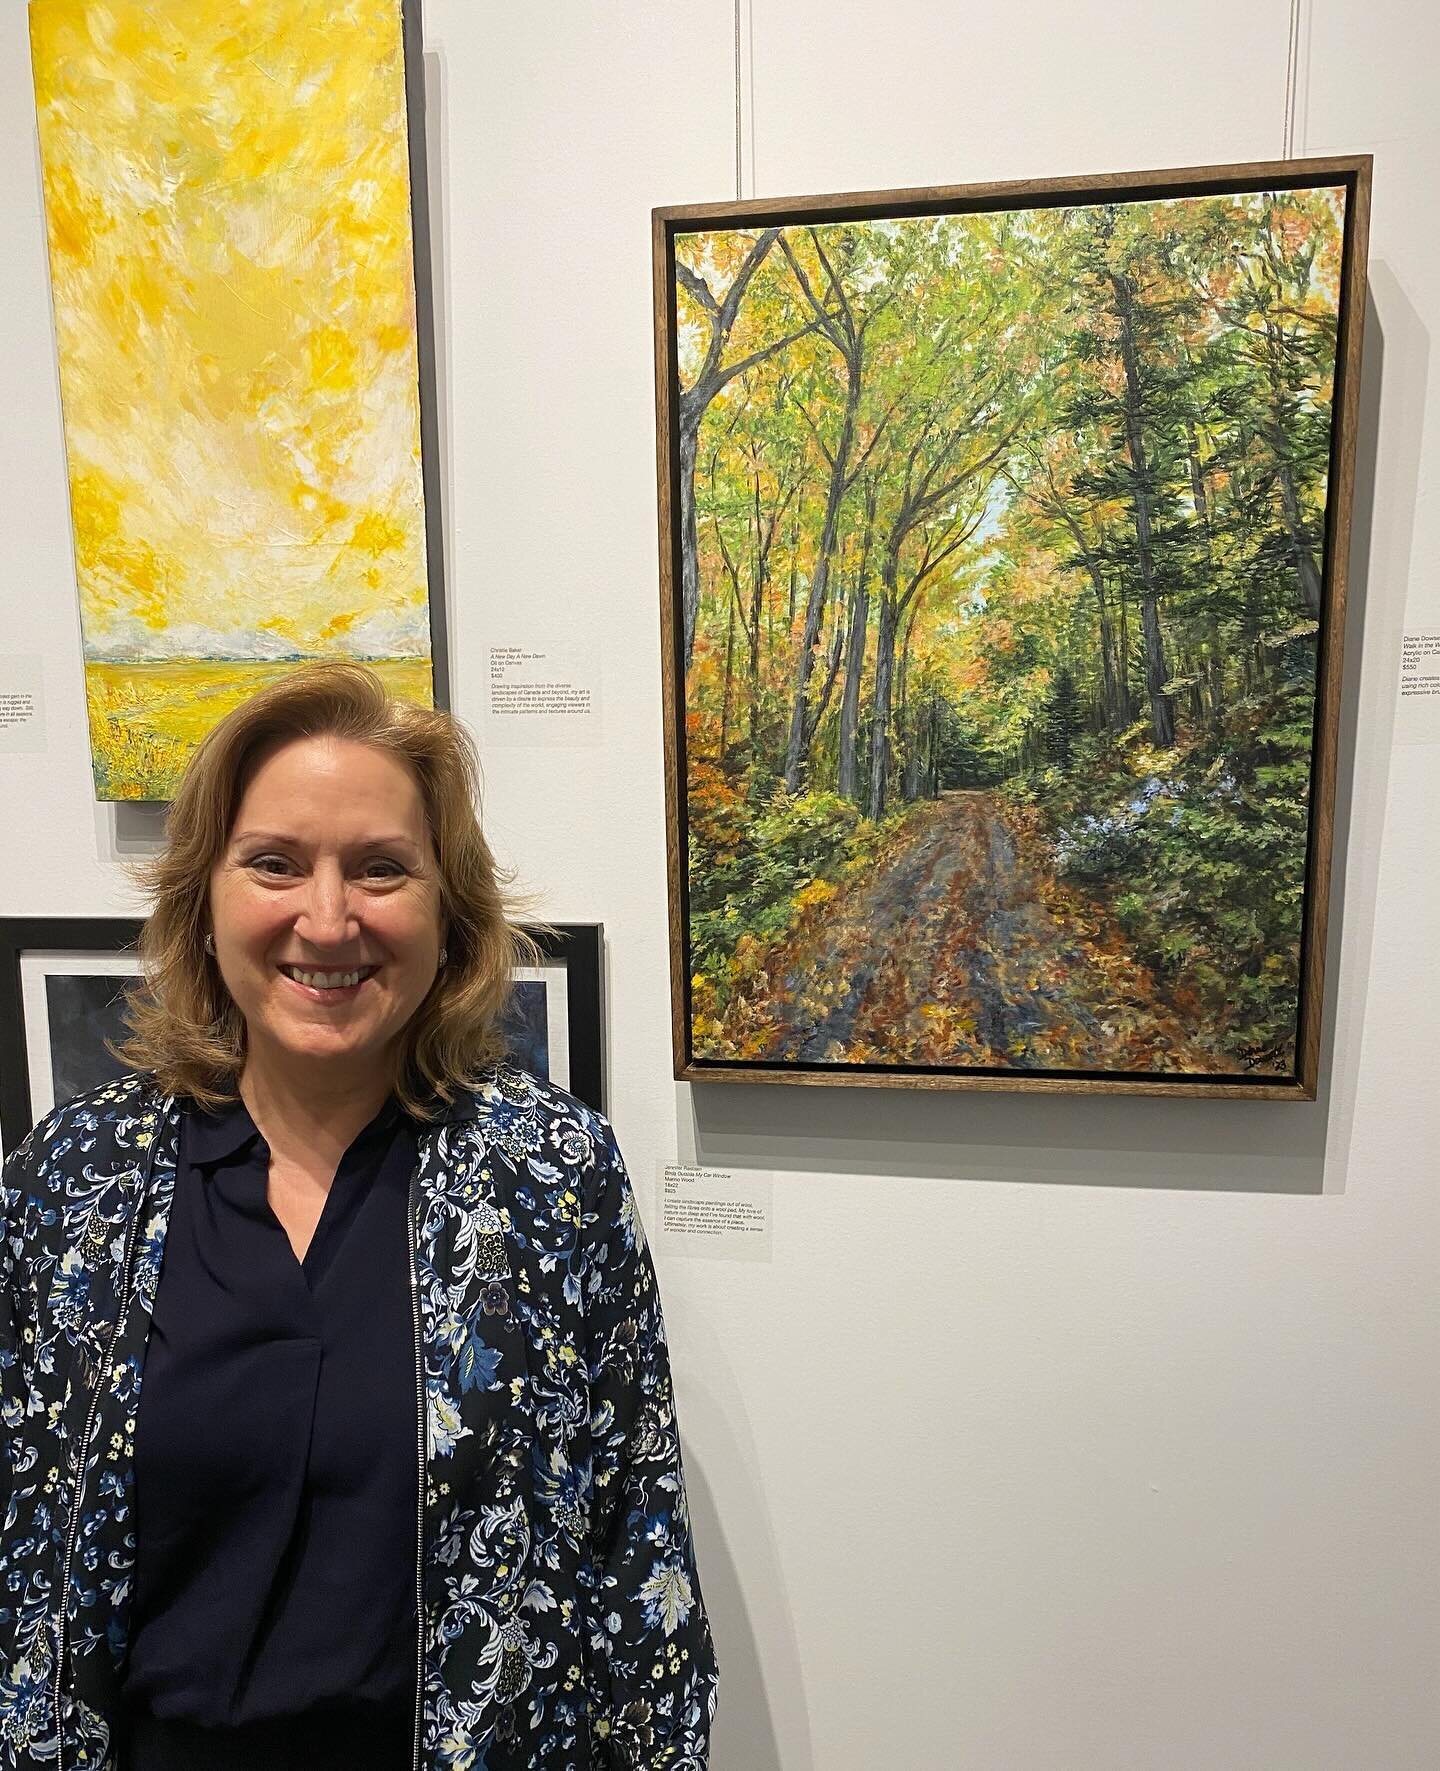 🎨🎉🎨 Had fun at the opening reception of the You Do You exhibition @lesliegrovegallery.ca! 

I was so happy that &ldquo;Walk in the Woods&rdquo; was accepted into this show. I loved my trip to Haliburton and took so many pictures of the lush autumn